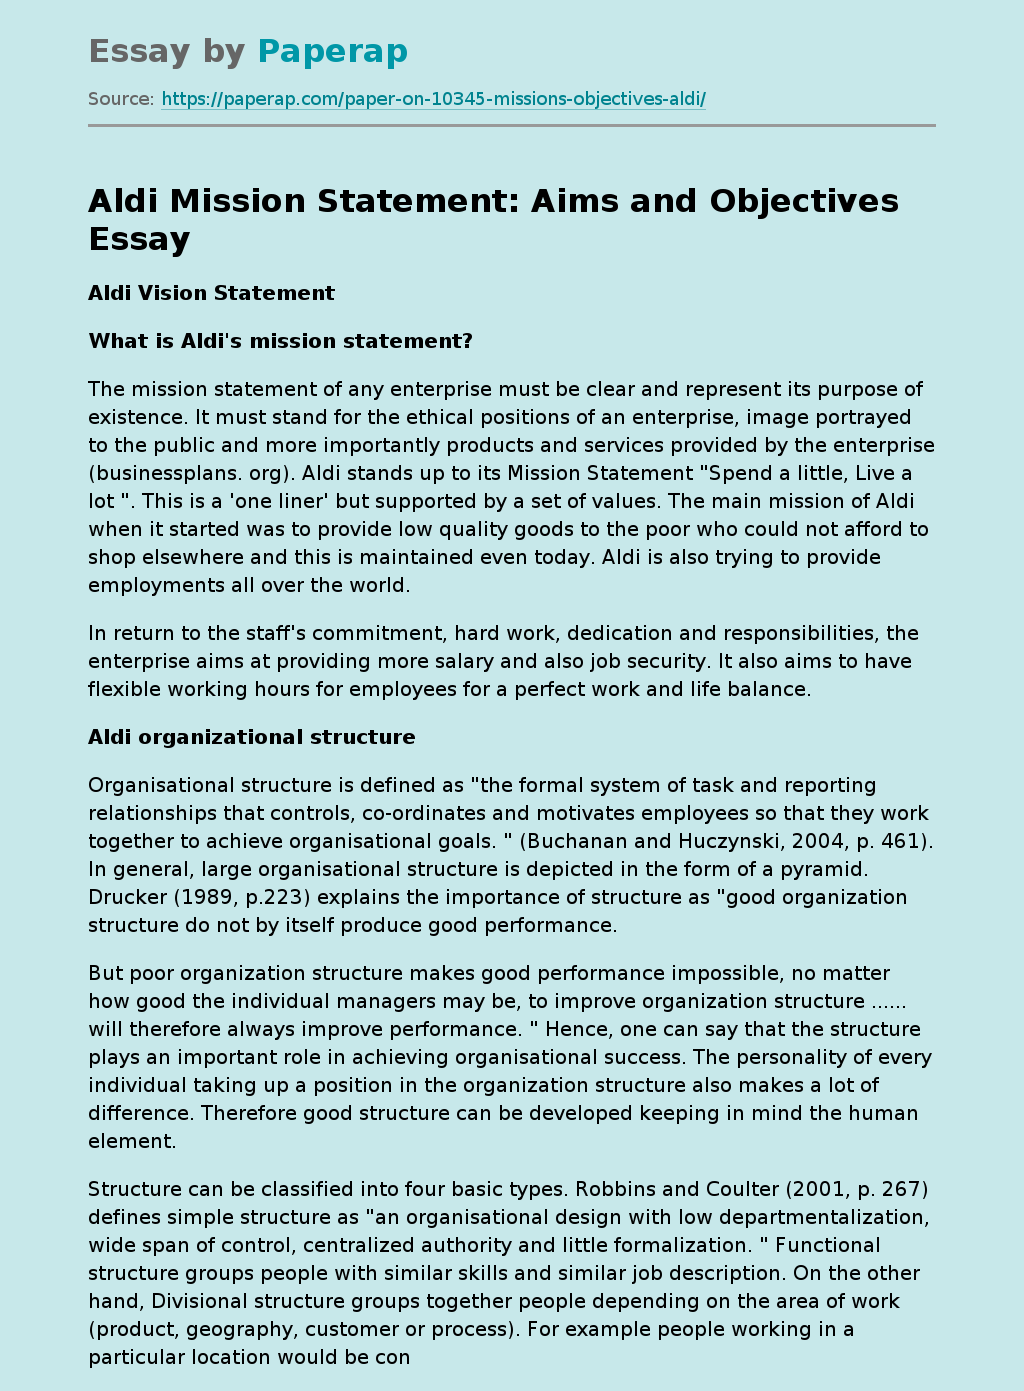 Aldi Mission Statement: Aims and Objectives